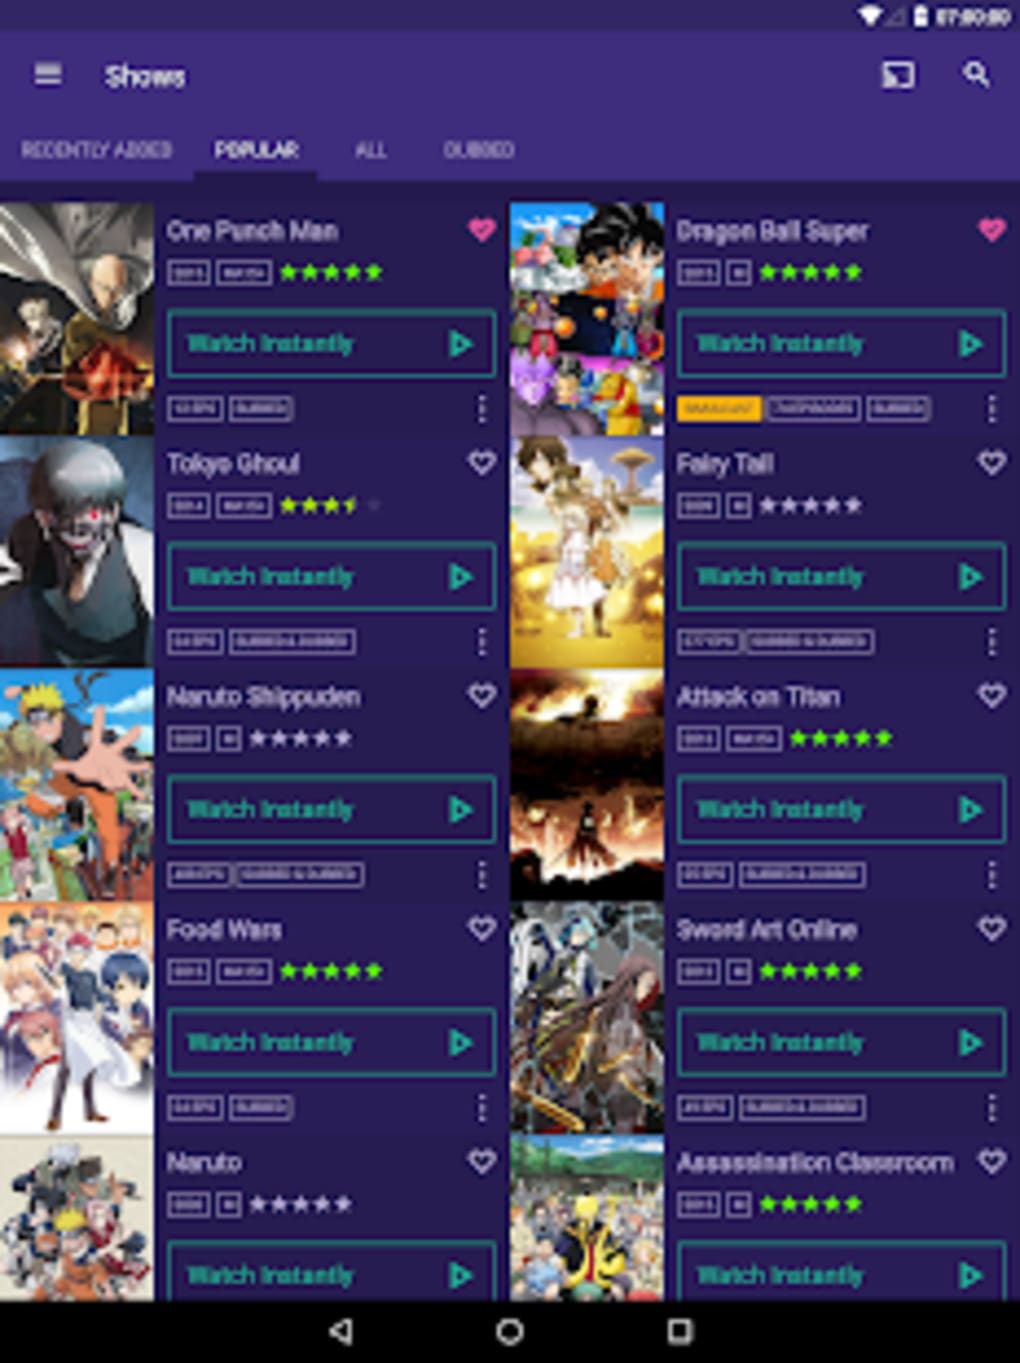 AnimeLab - Watch Anime Free APK for Android - Download